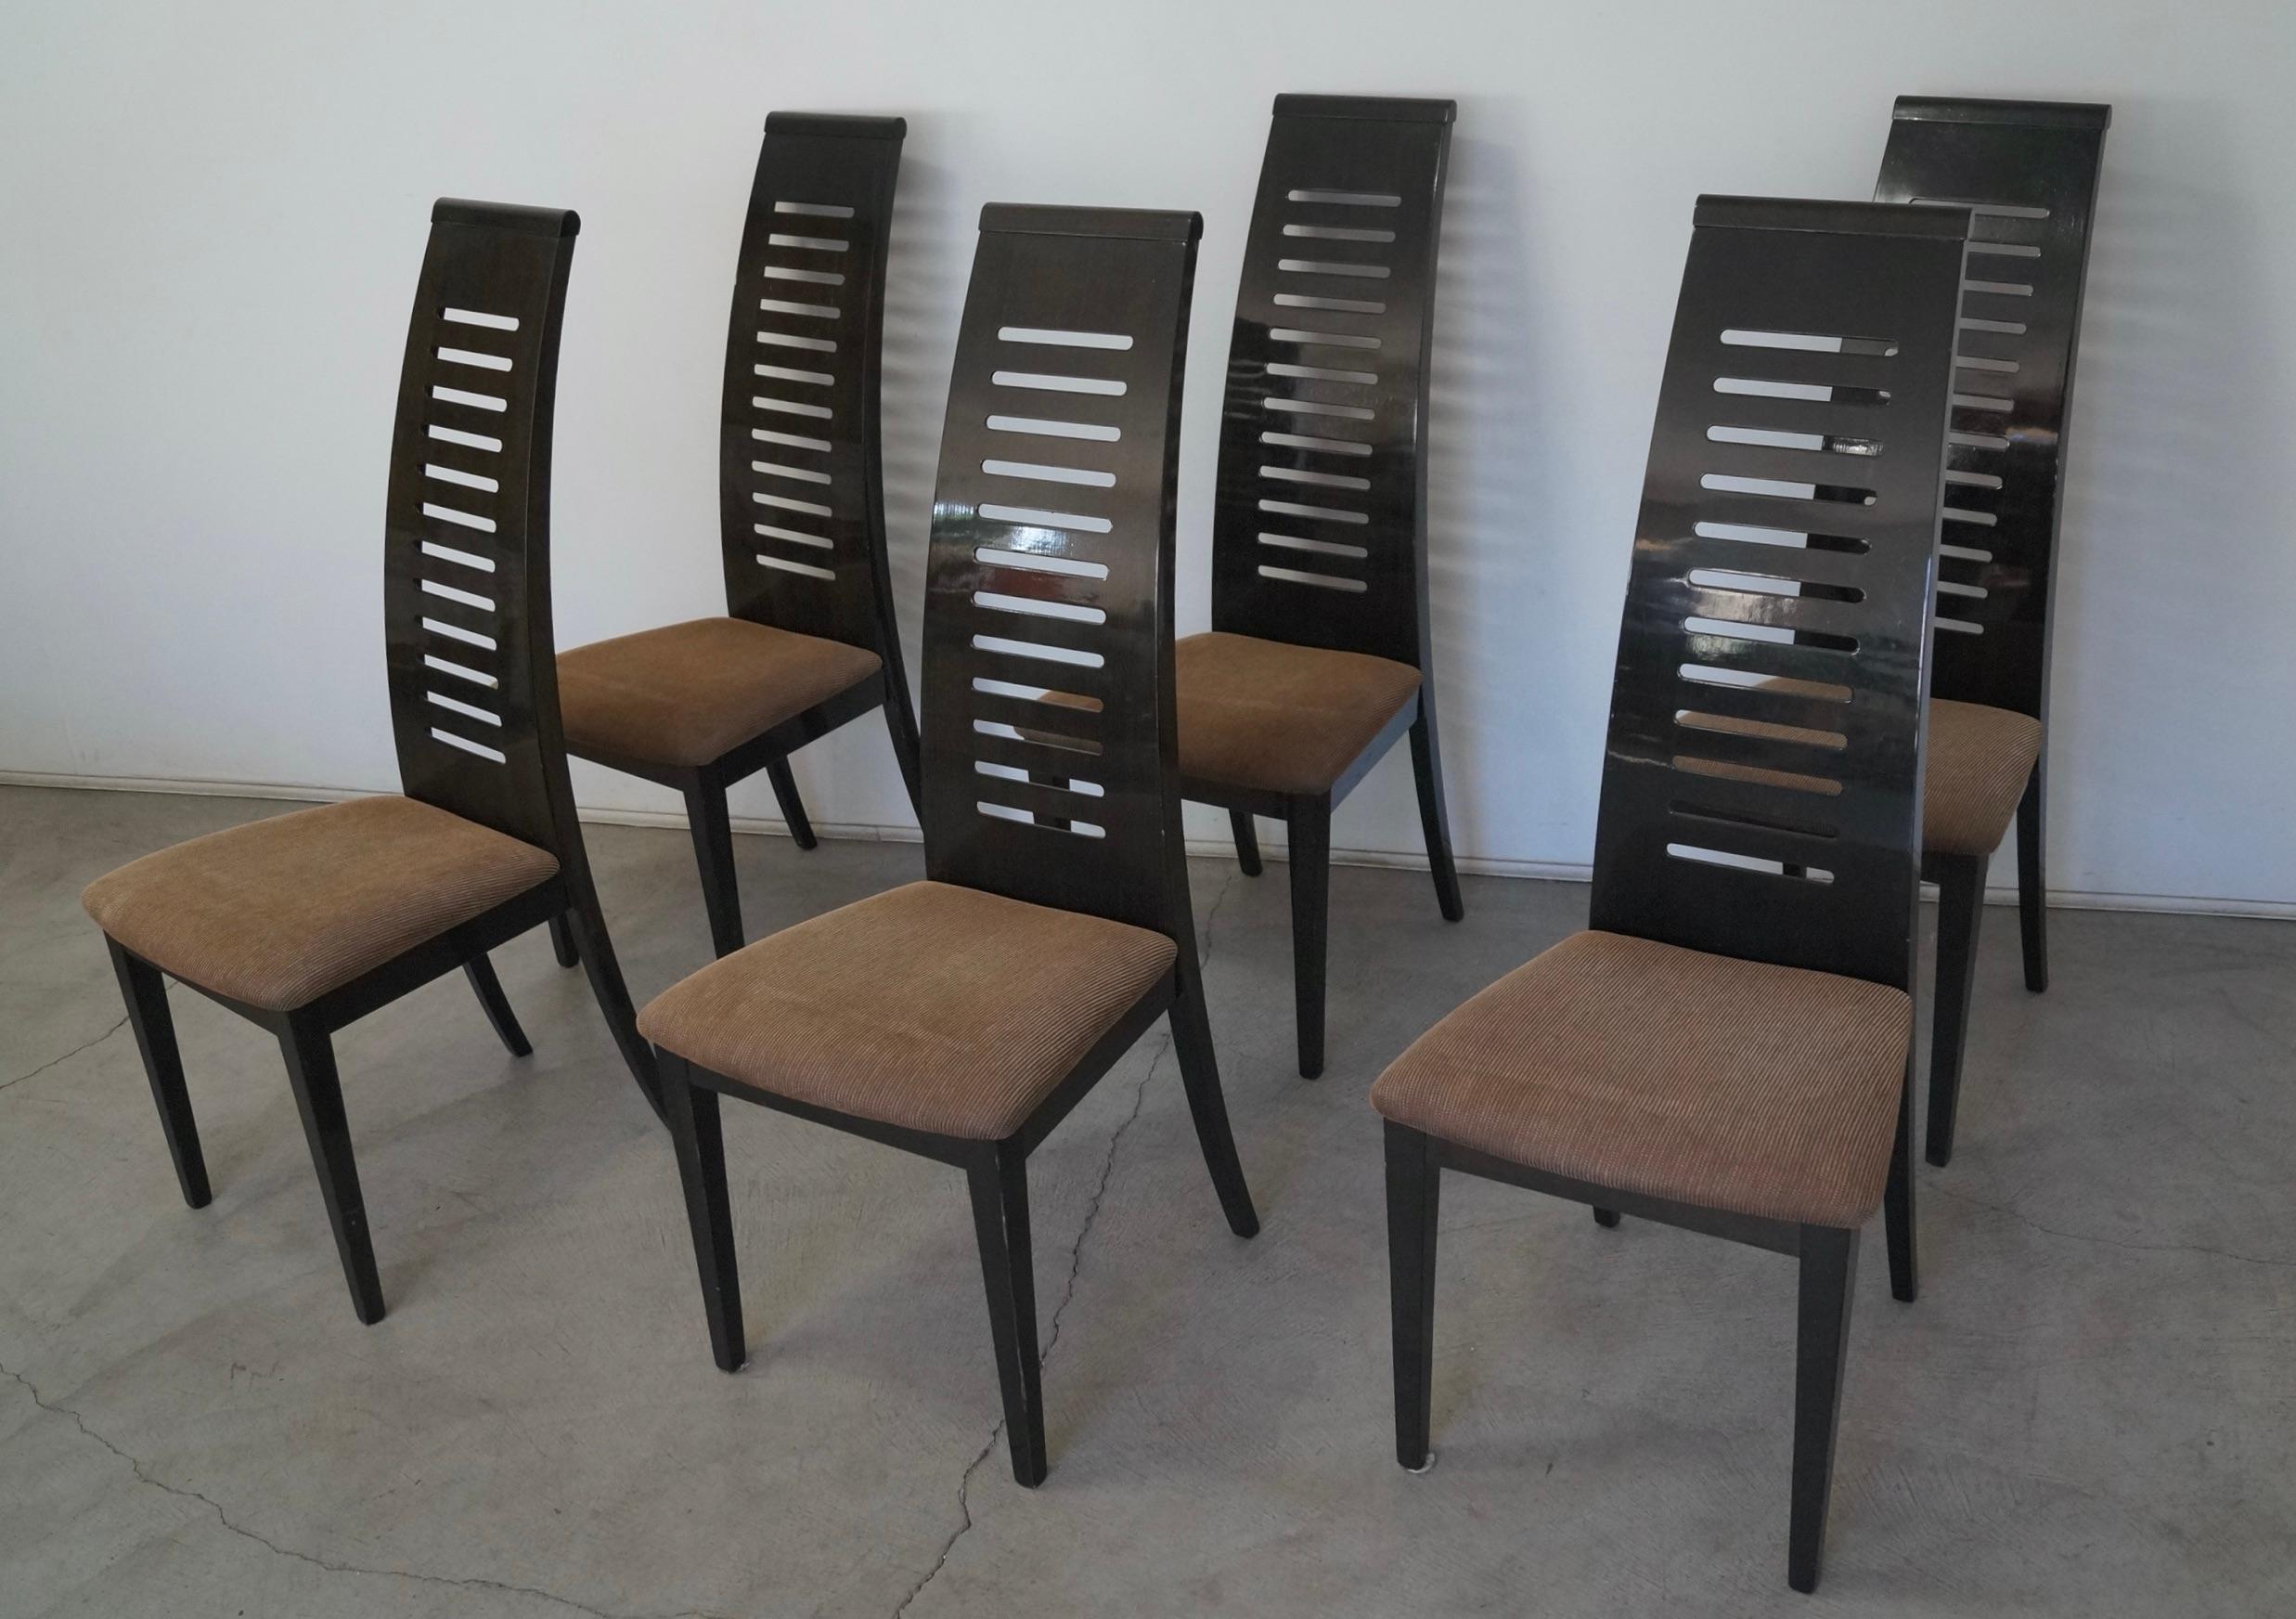 Postmodern Ello Furniture Pietro Costantini Dining Chairs - Set of 6 For Sale 3